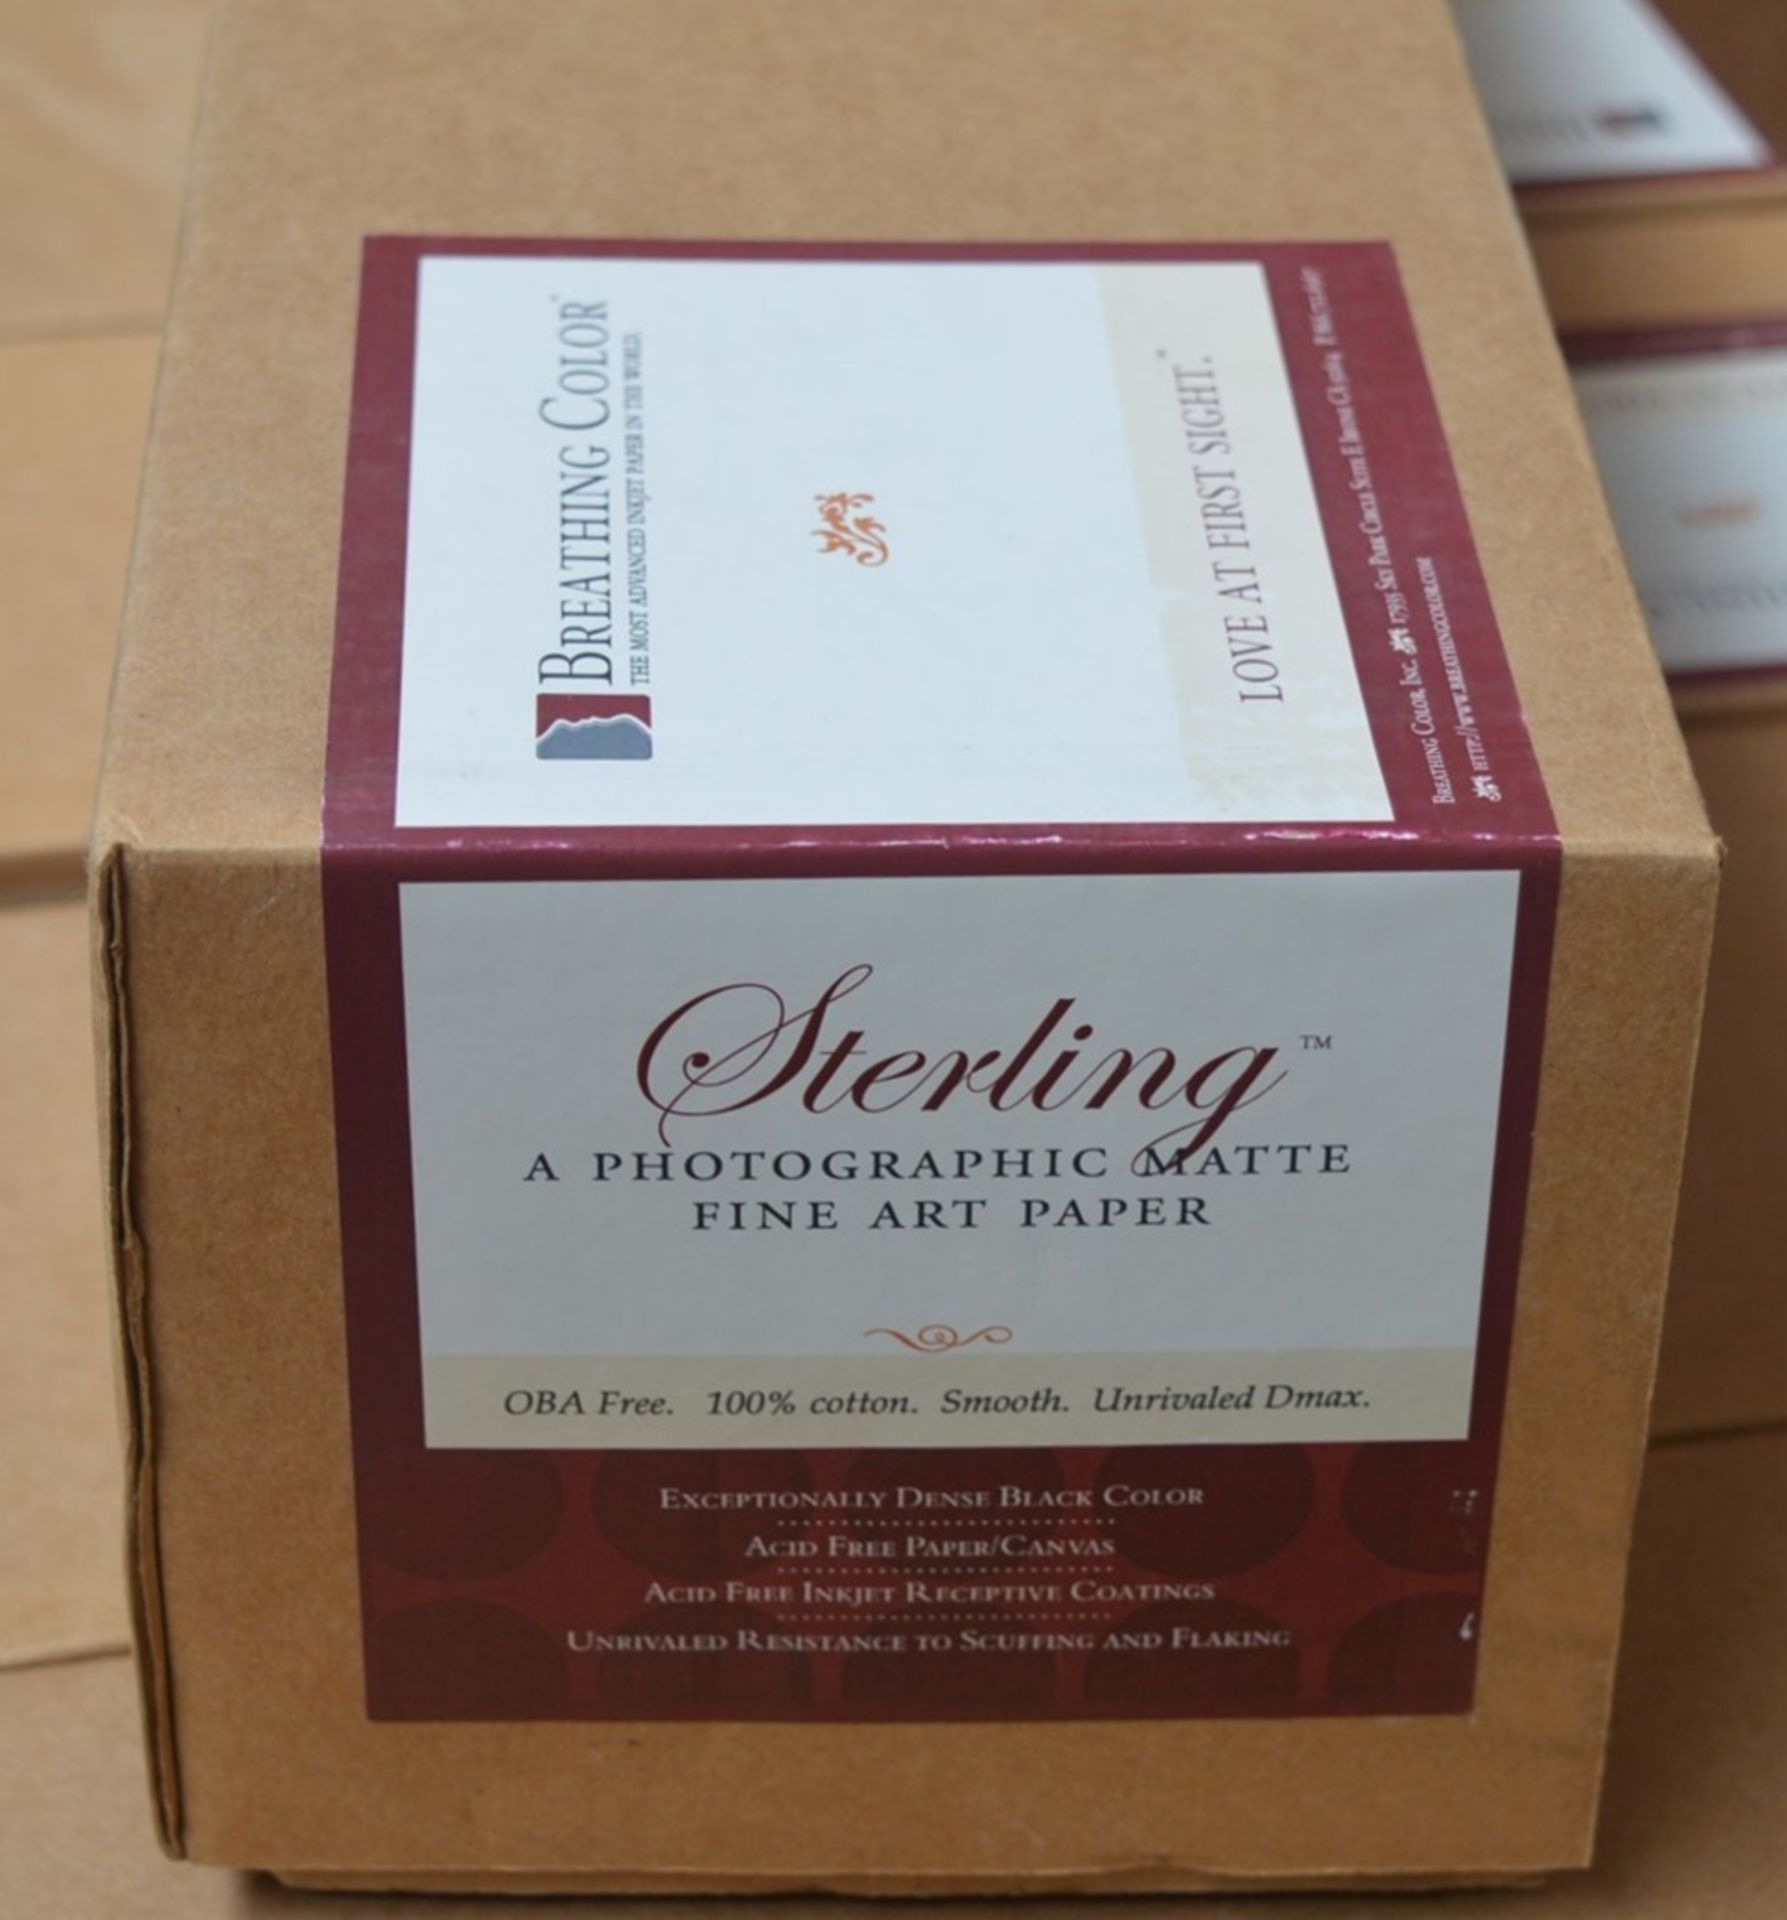 1 x Roll of Breathing Colour STERLING Photographic Matte Fine Art Paper - Size 17" x 50' - 250gsm - - Image 2 of 5